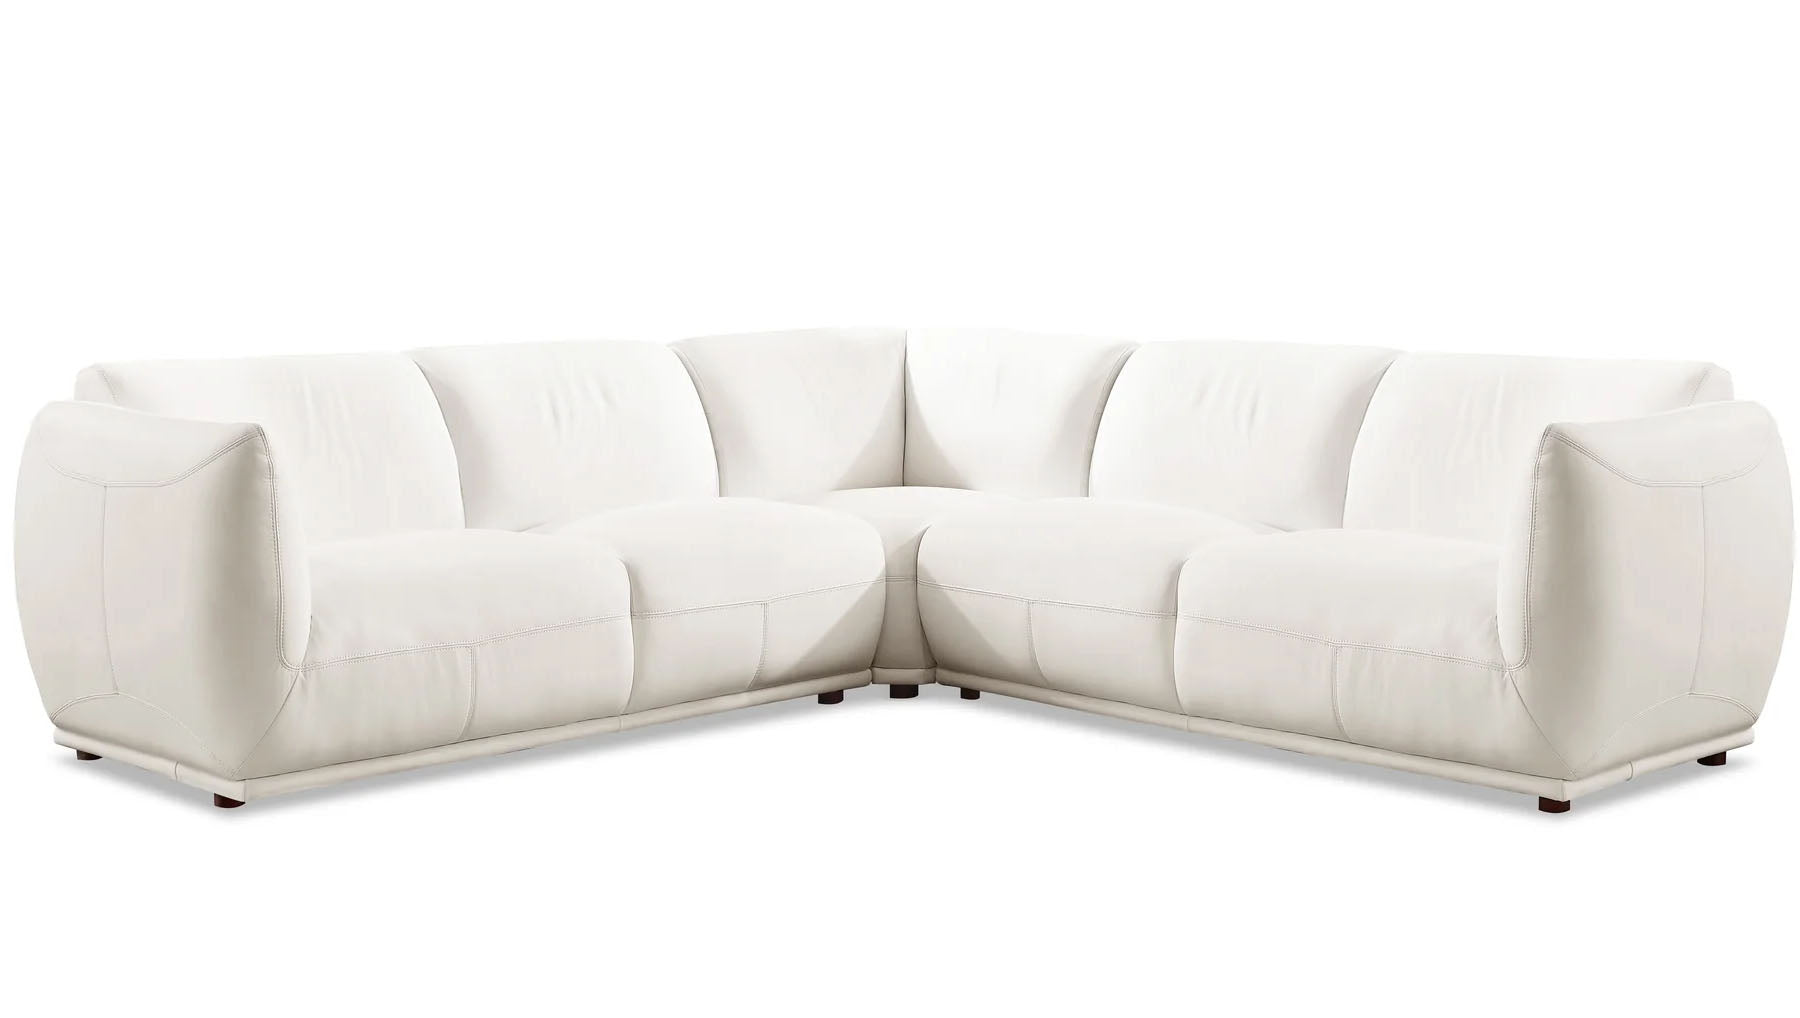 Moon Leather Sectional Collection - MJM Furniture